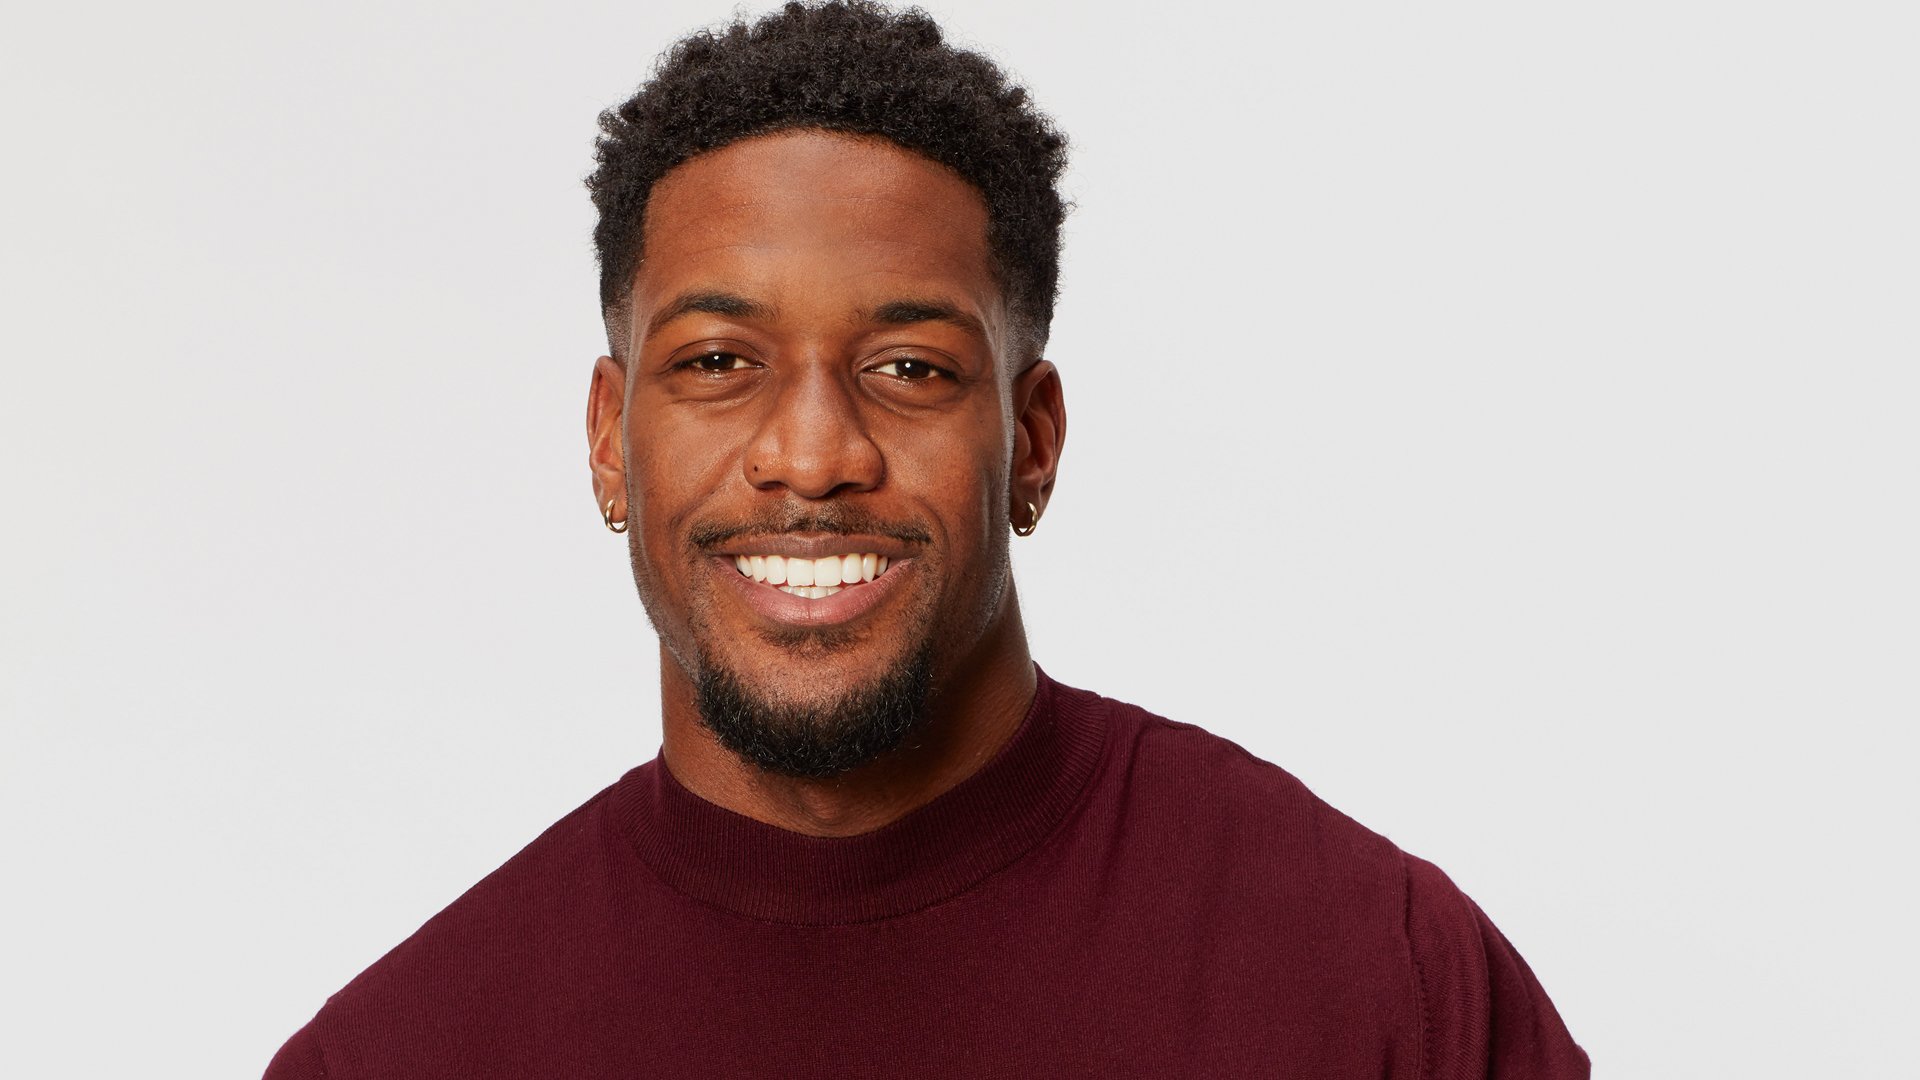 Headshot of Demar Jackson from ‘Bachelor in Paradise’ and ‘The Bachelorette’